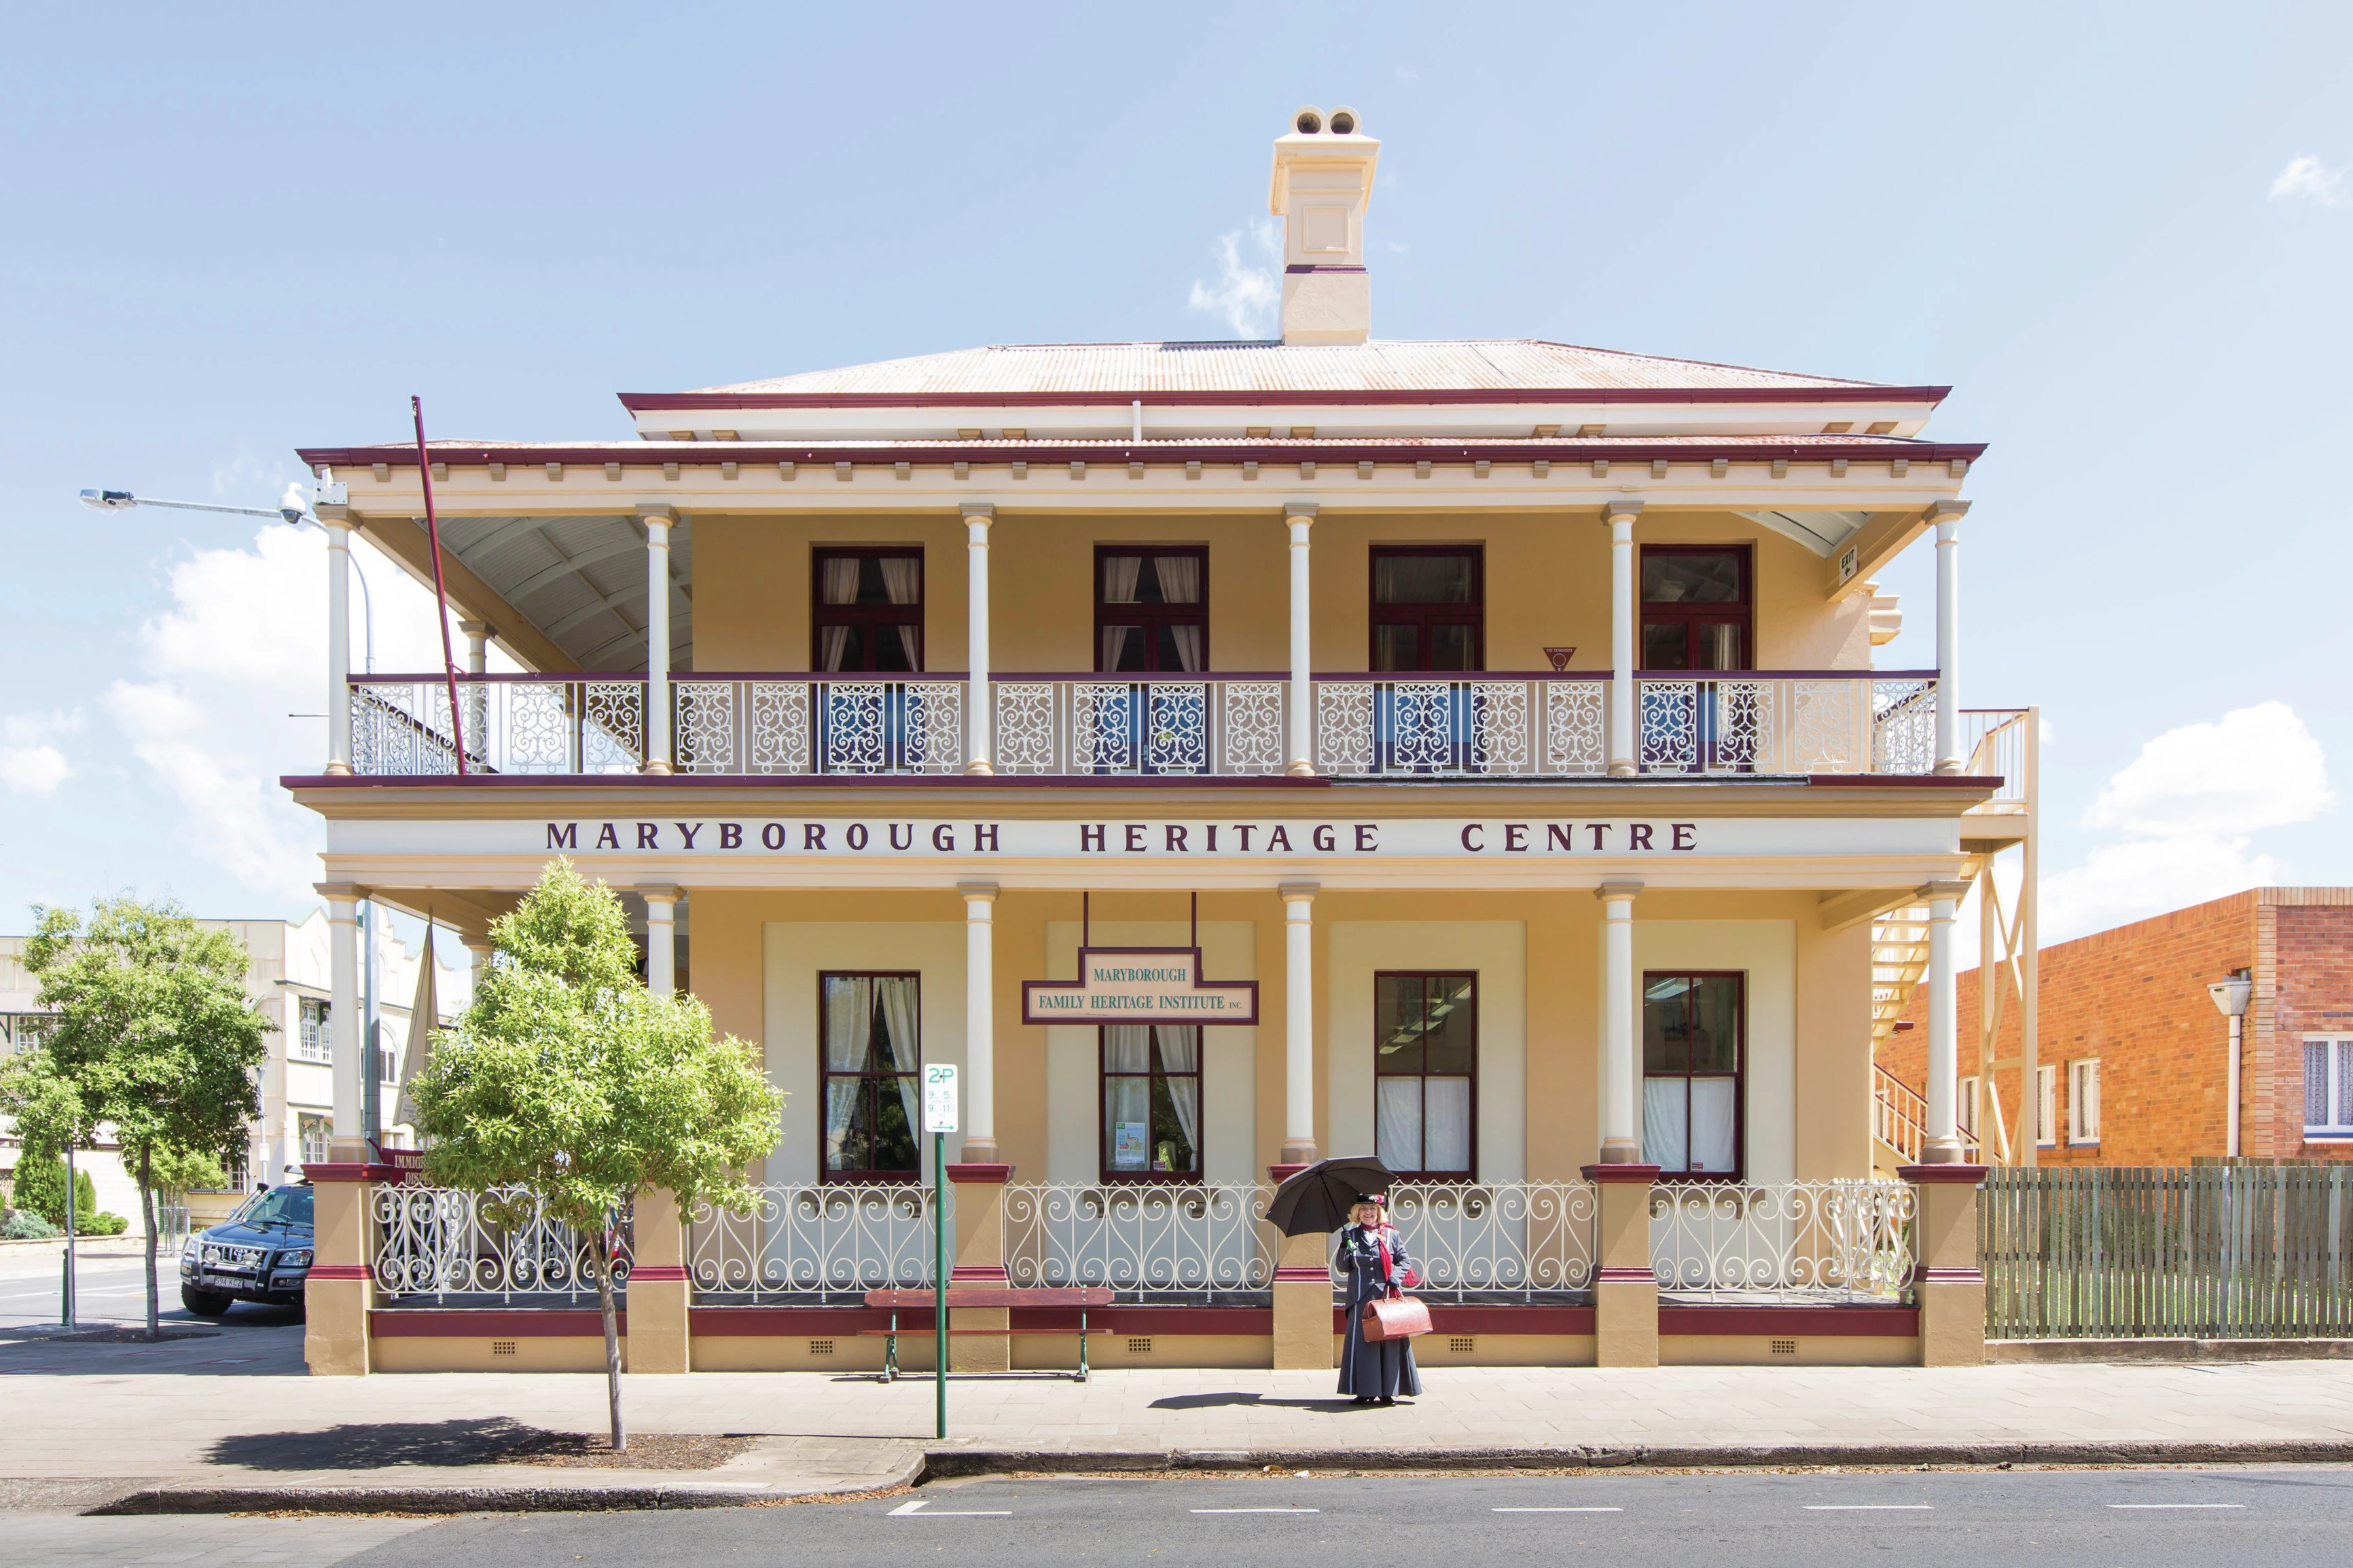 A woman in historic clothing stands outside the ornate, double-story Maryborough Heritage Centre on a sunny day. Image credit: Andrew Tallon/Tourism and Events Queensland